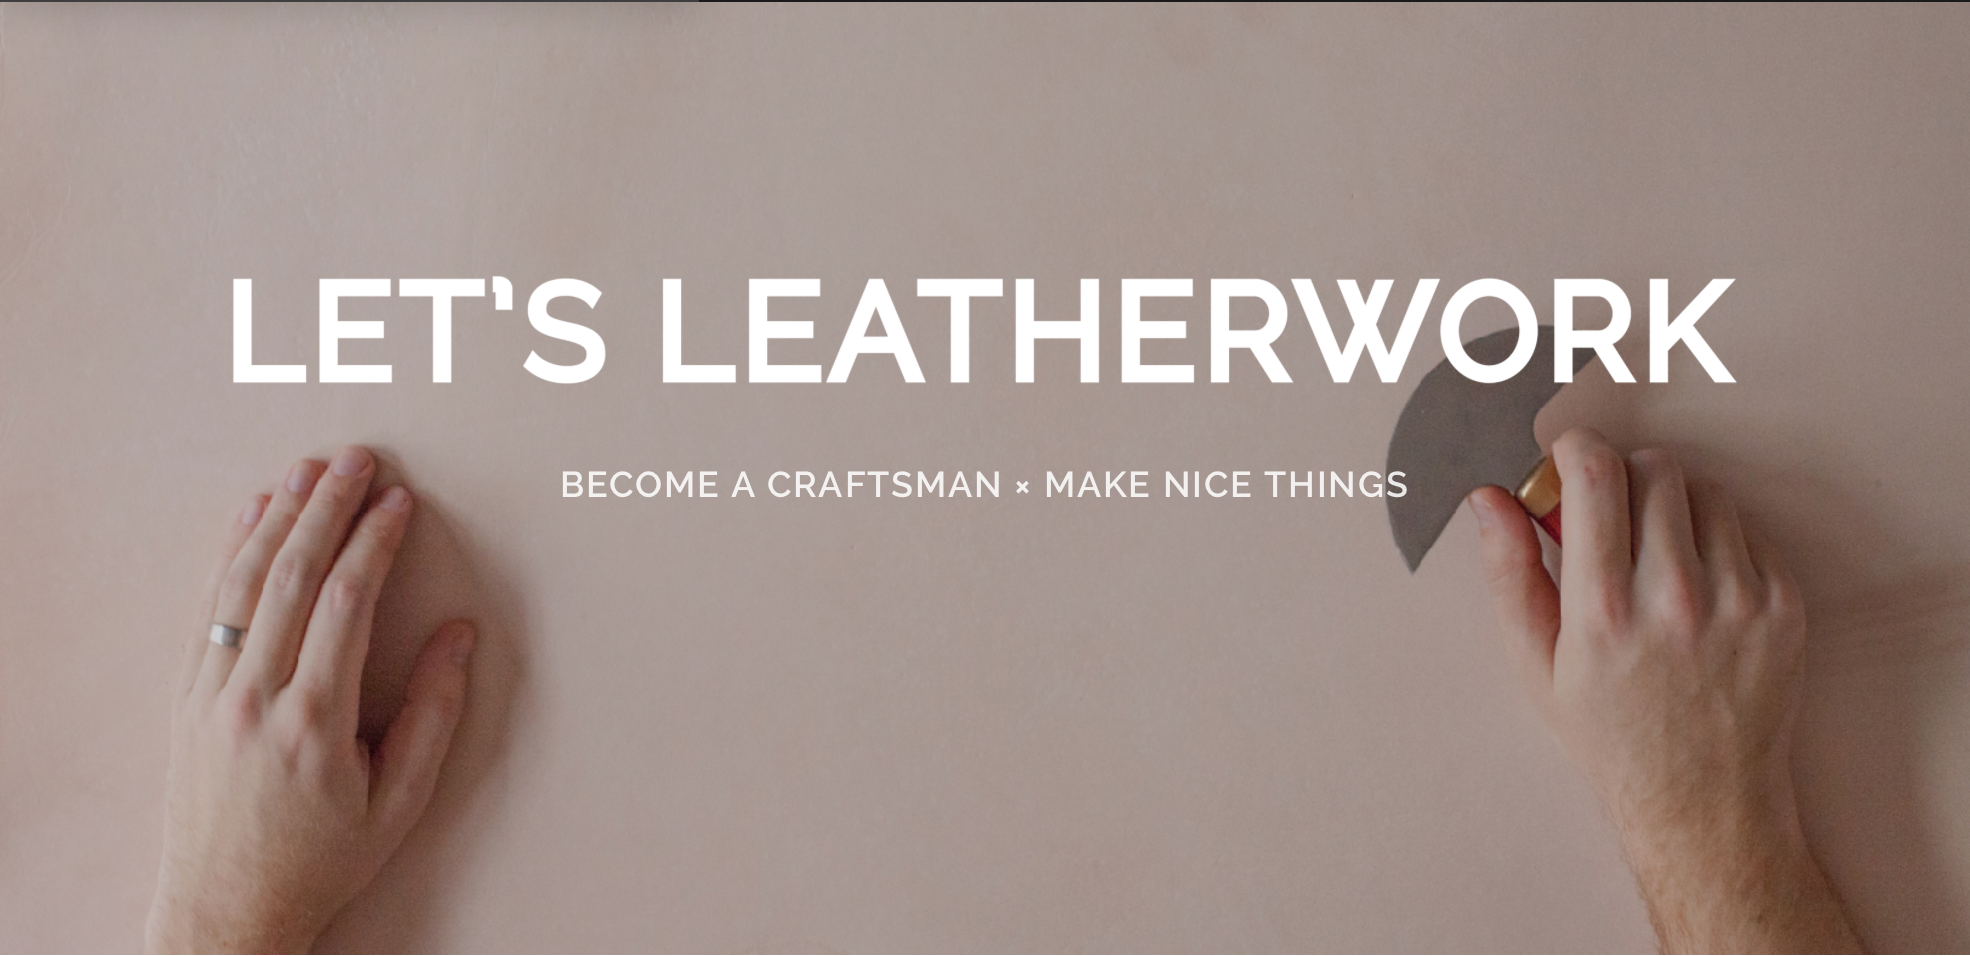 One-Pager List: Tools Needed for Leathercraft